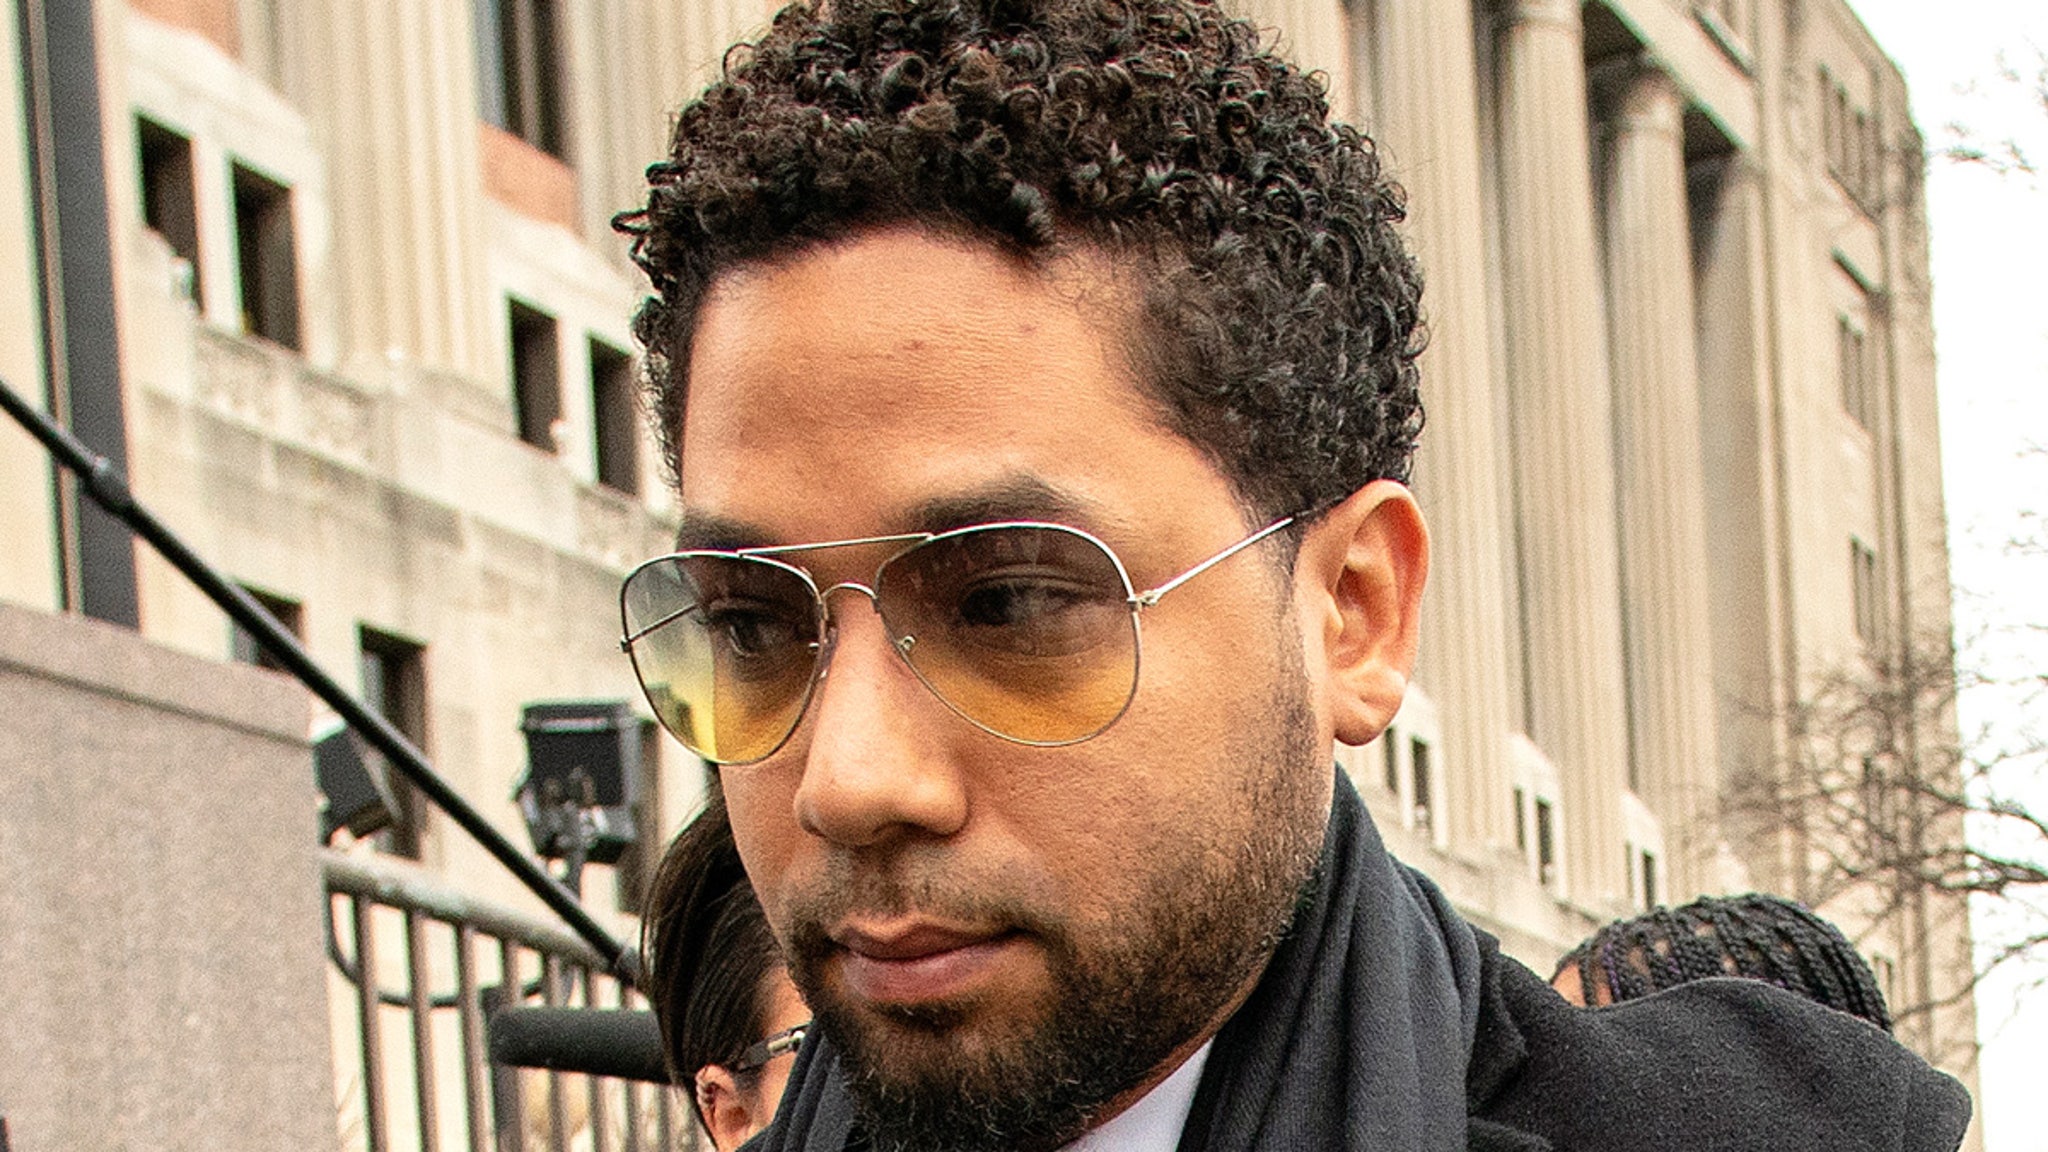 Jussie Smollett Wants Trial Verdict Changed Cites Jury Selection Issues – TMZ